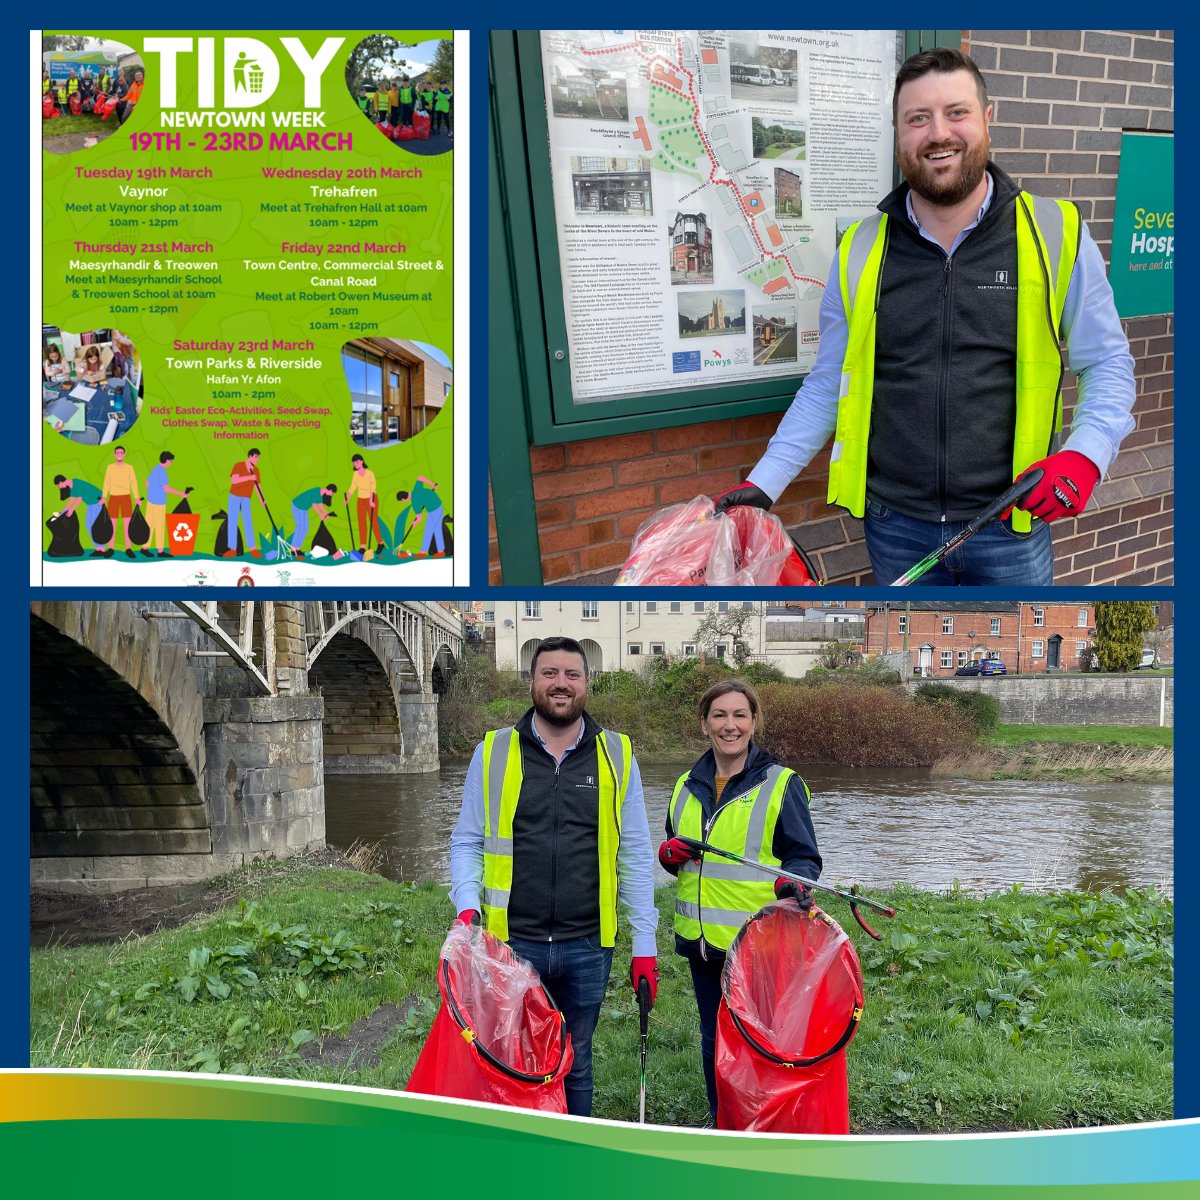 Social value manager, Alison Hourihane together with site manager, Paul McCaffrey, joined the team of volunteers for Tidy Newtown Week and spent time litter picking around the town. Fantastic to support this initiative with @PowysCC and @Keep_Wales_Tidy. #SocialValue #Tidying